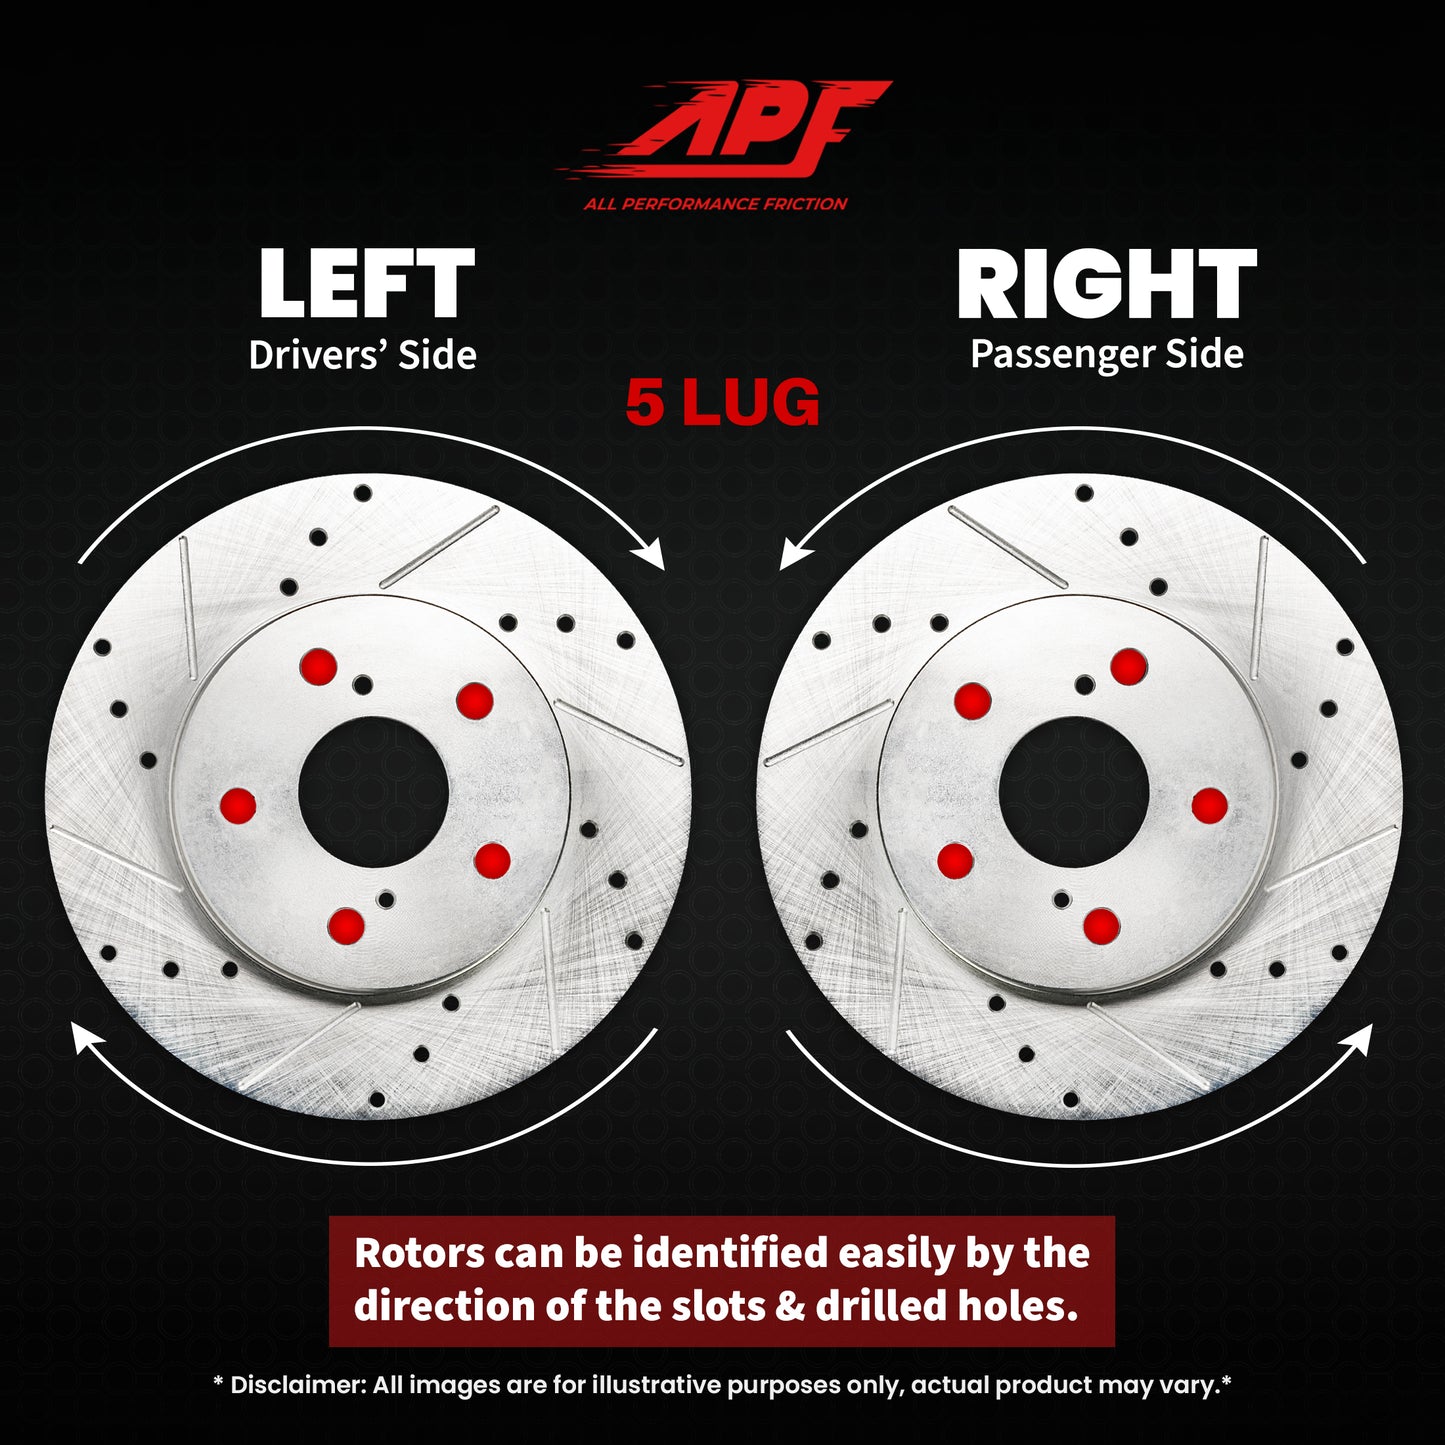 APF All Performance Friction Front and Rear Rotors and Pads Full Kit compatible with Acura ILX 2013-2015 Zinc Drilled Slotted Rotors with Ceramic Carbon Fiber Brake Pads | $409.17